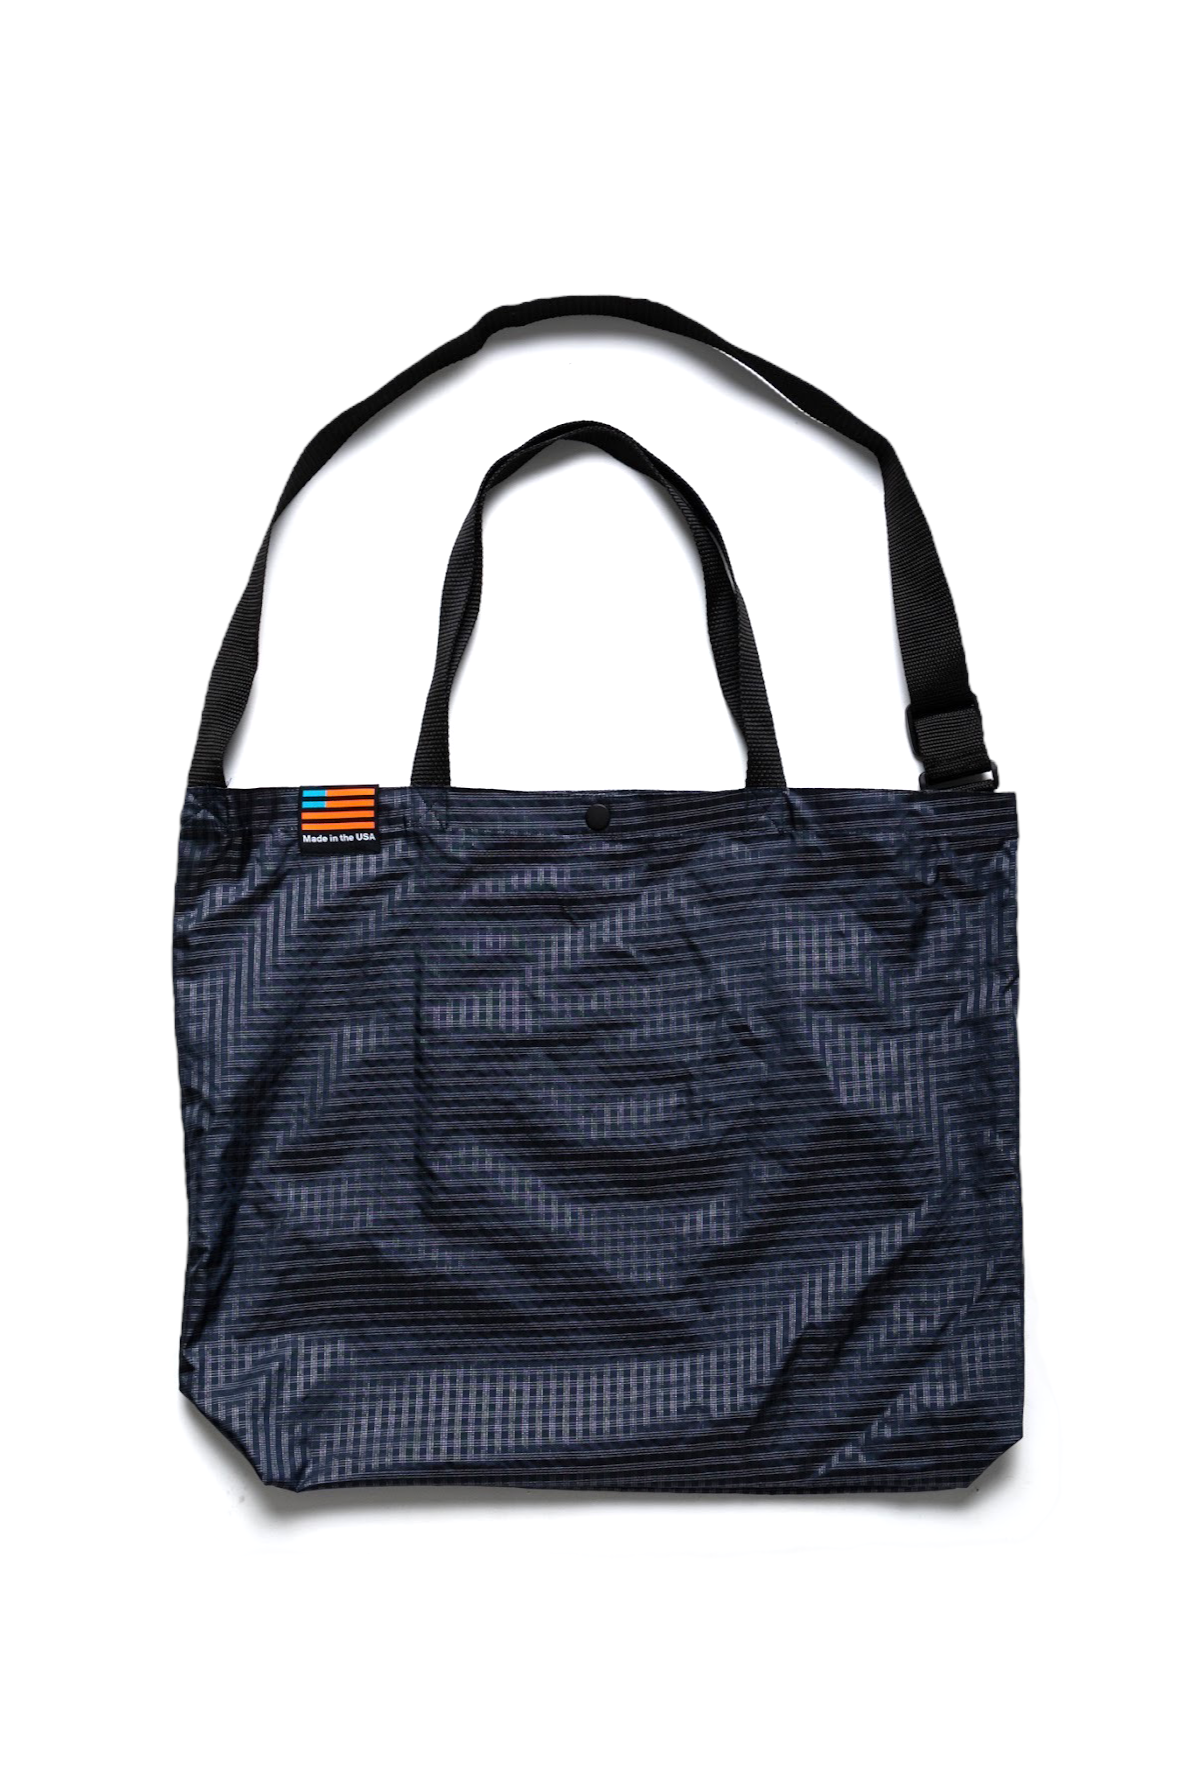 Oversized Tote - Navy Check